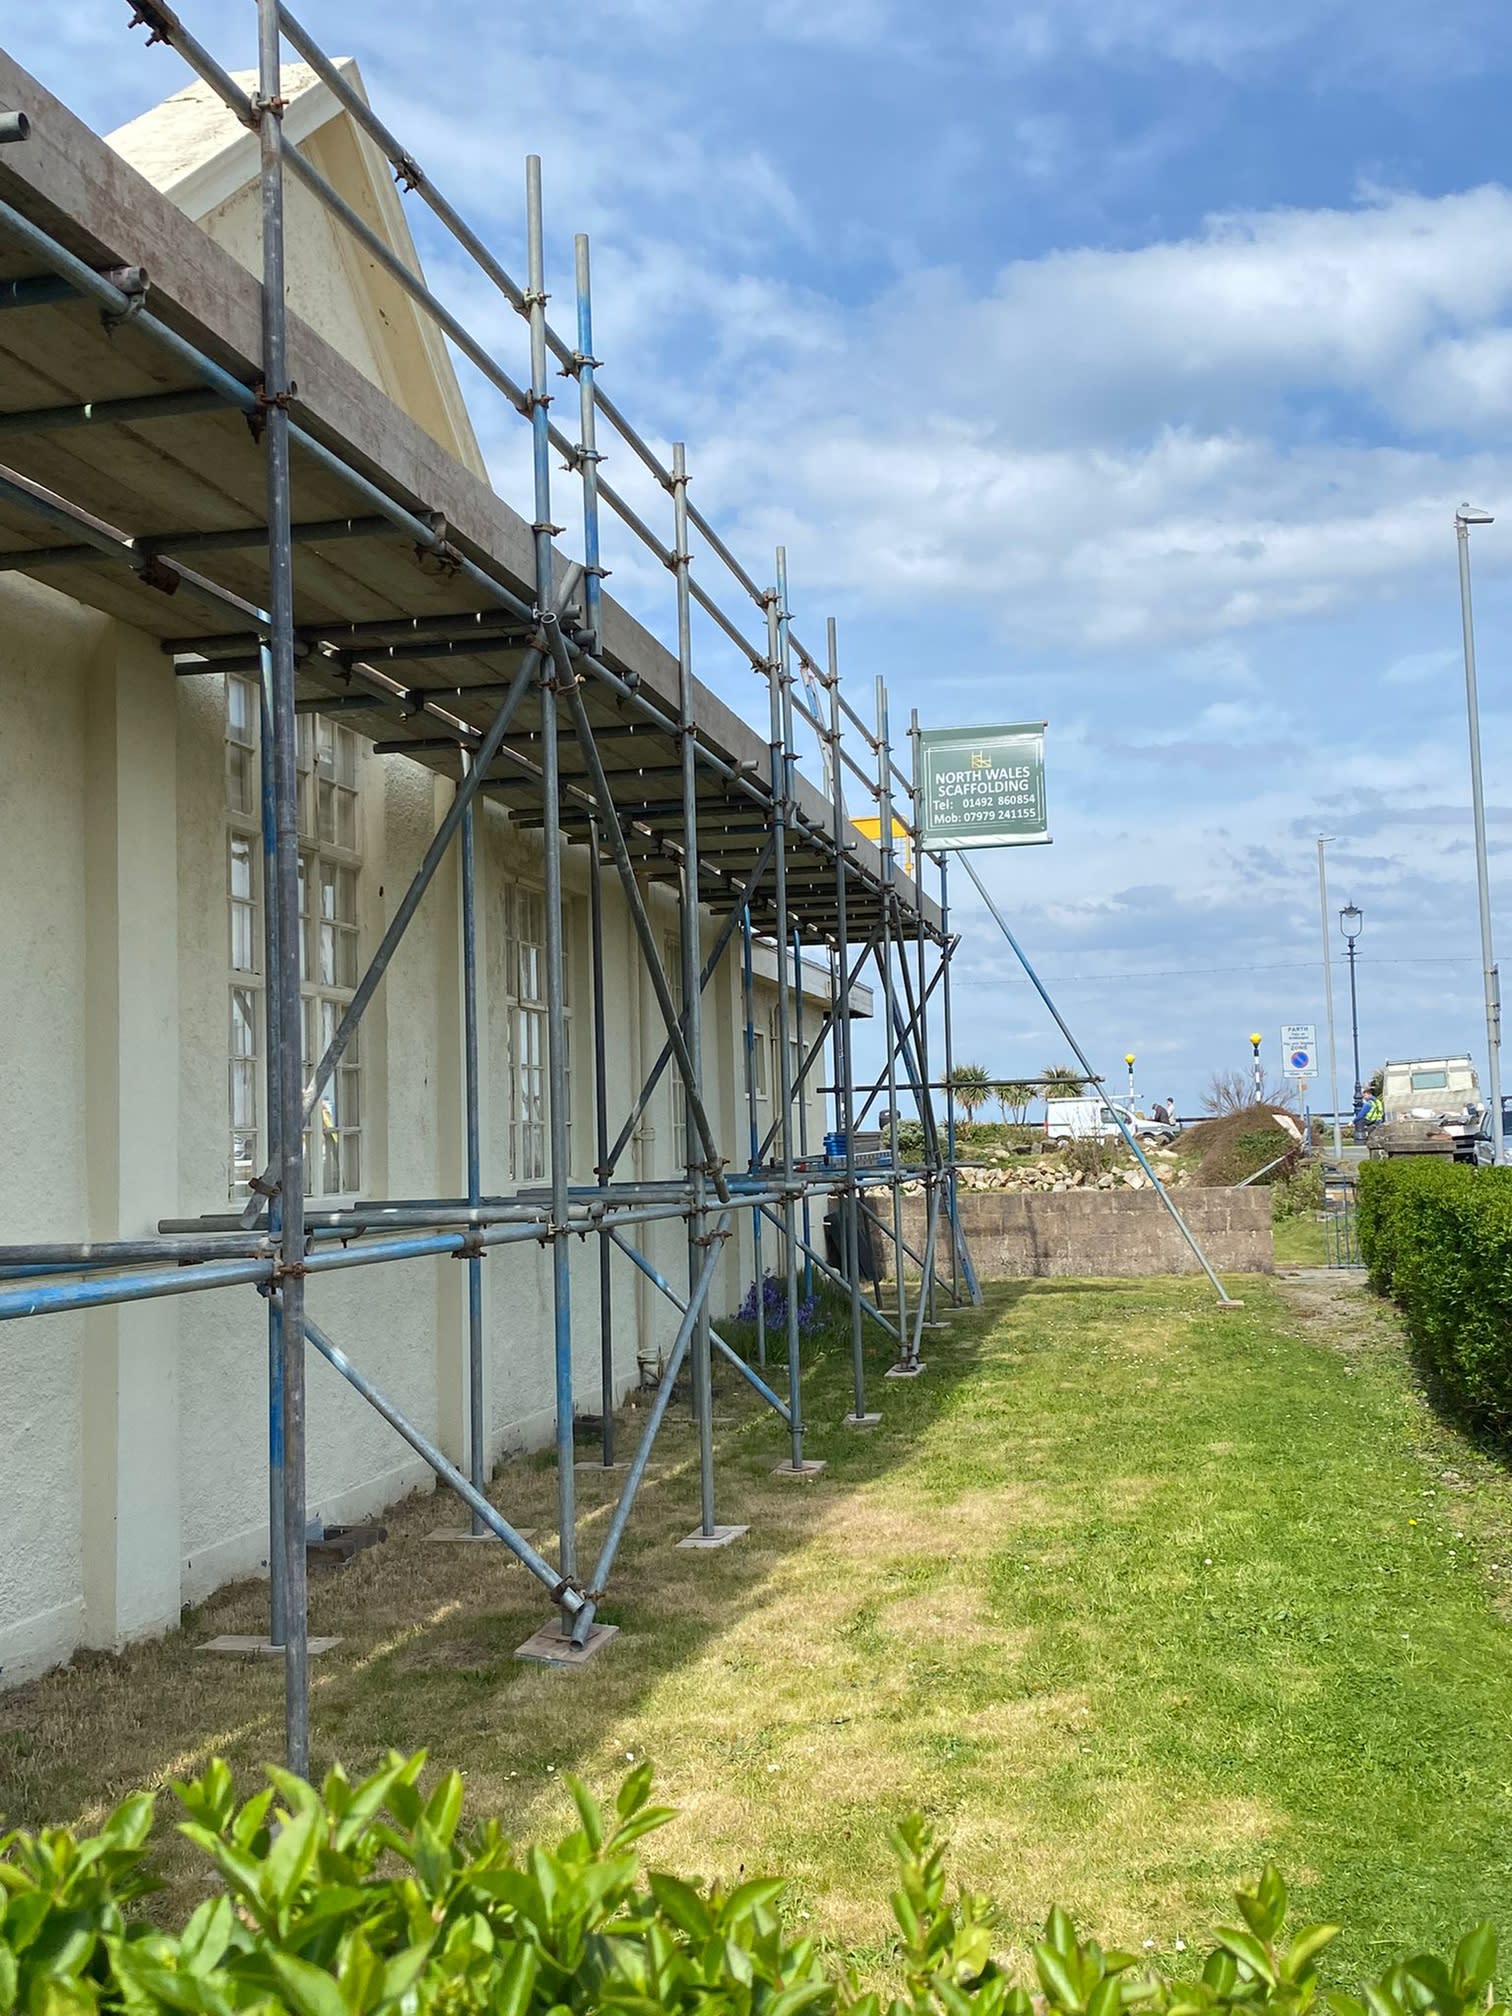 Images North Wales Scaffolding